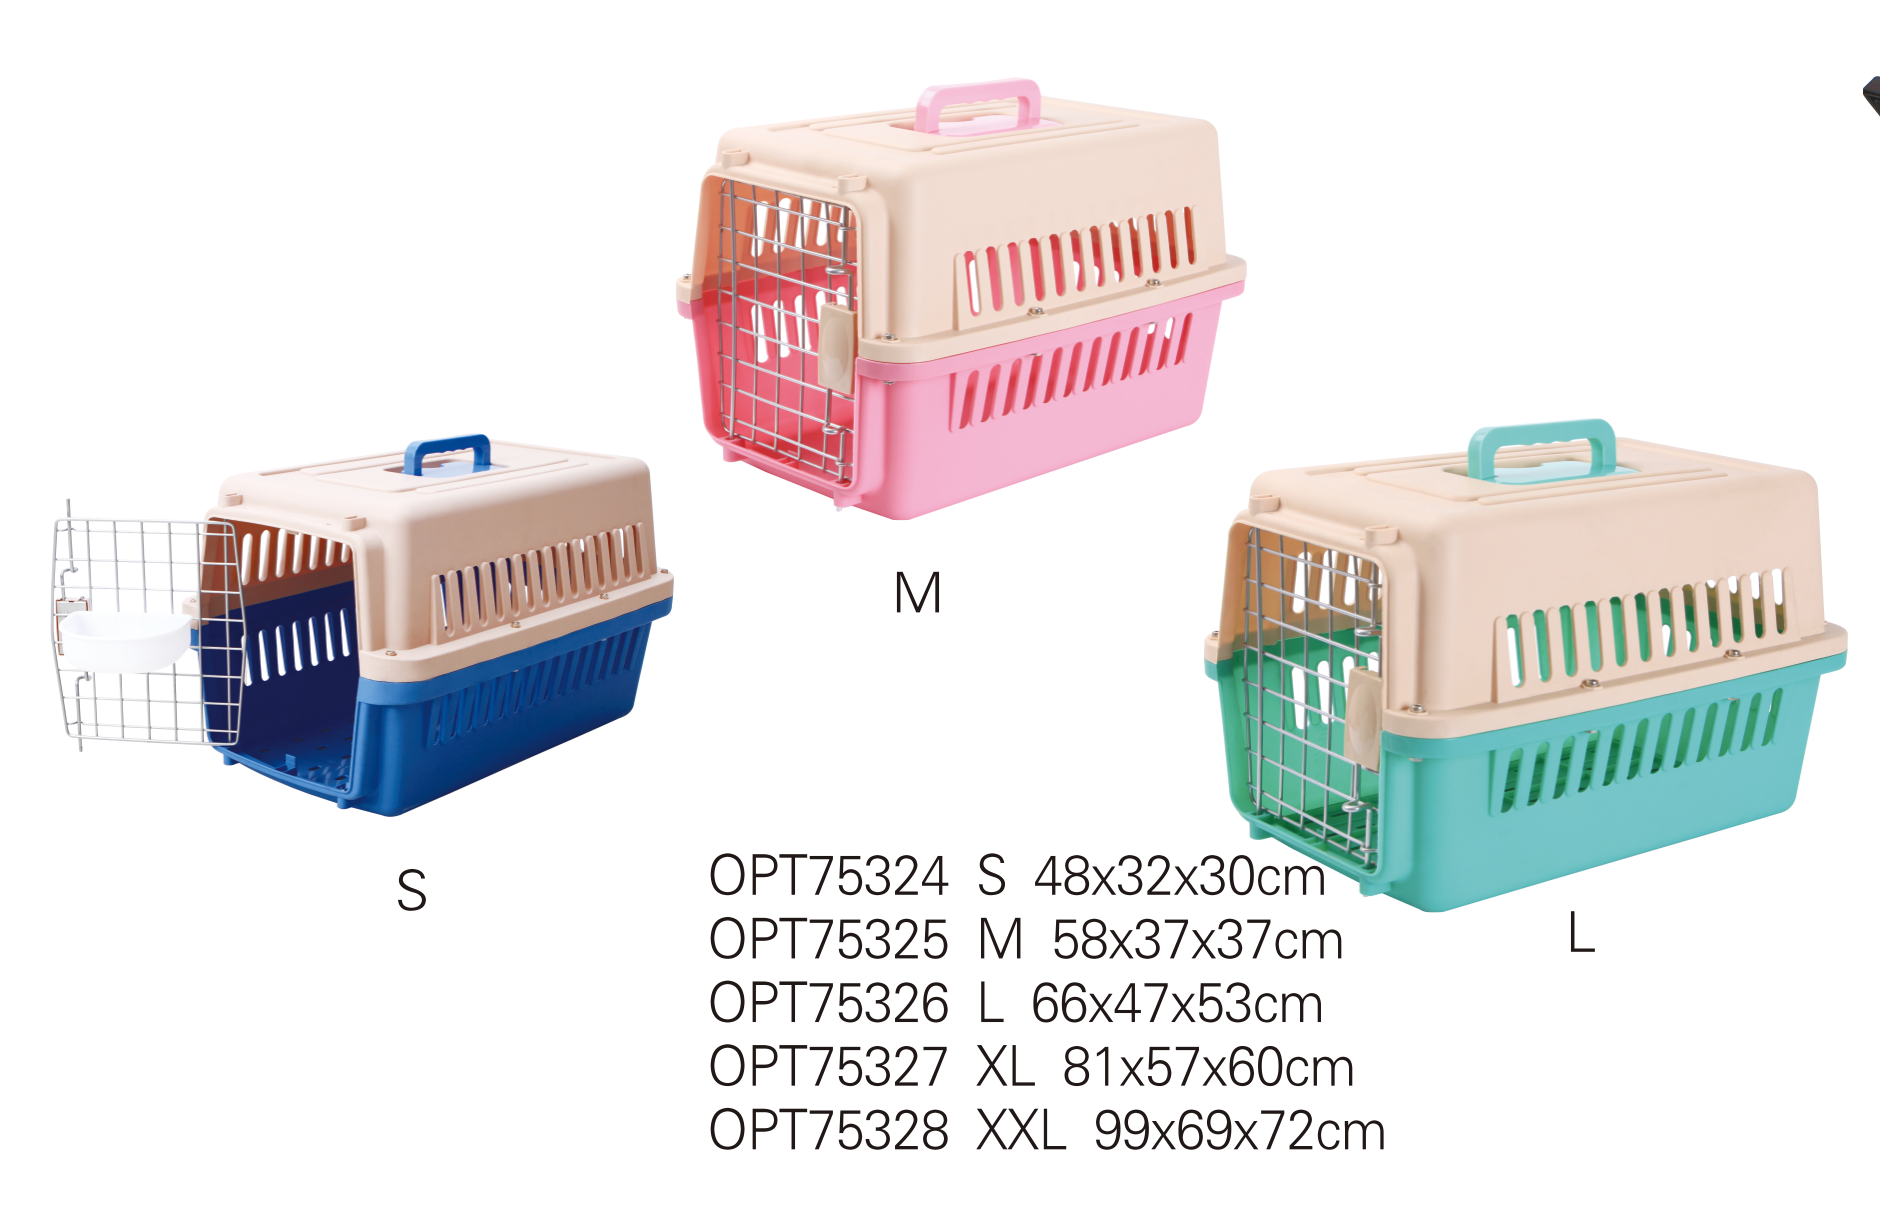 Pet carriers OPT75324-OPT75326